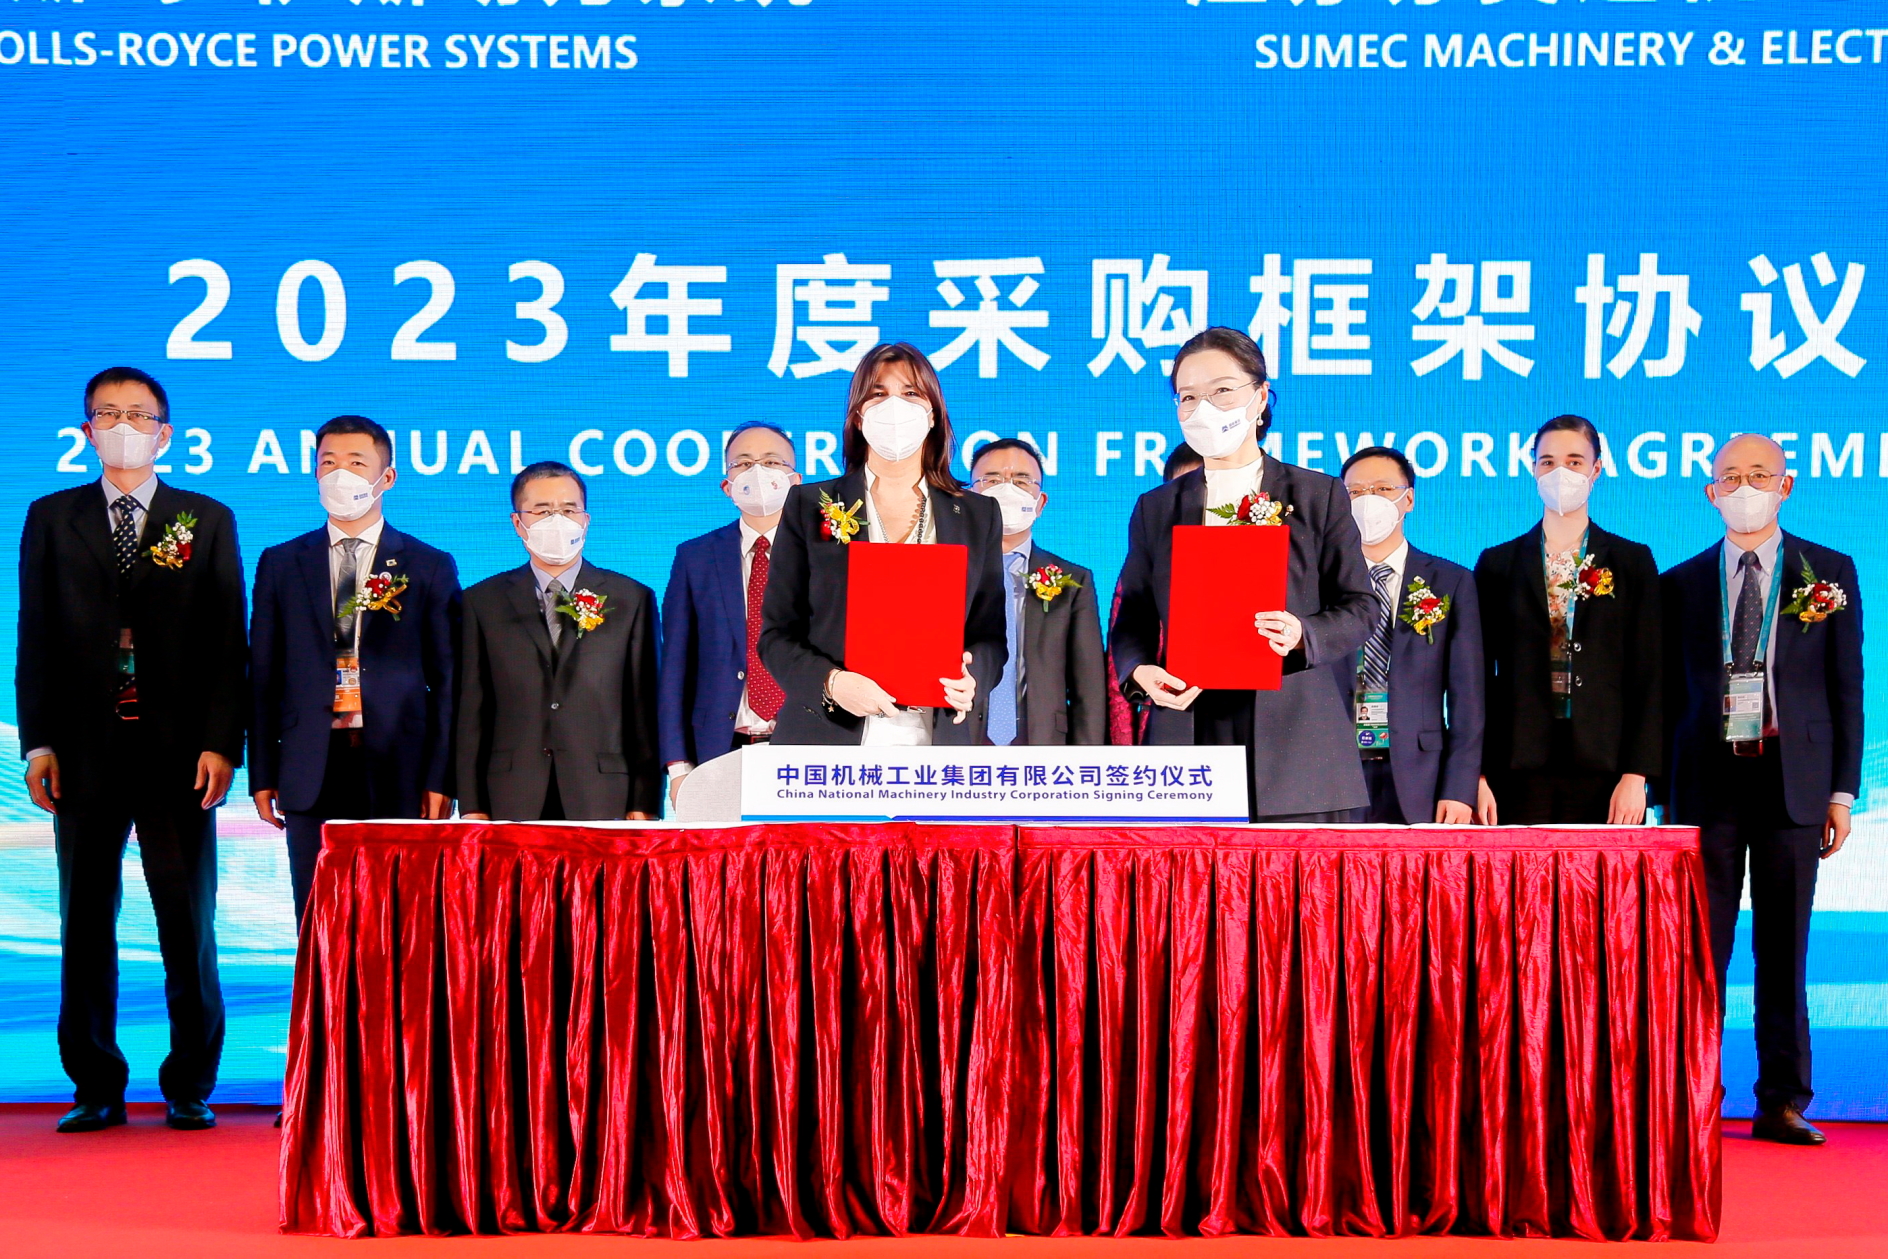 Sumec signs LOI with Rolls-Royce for 200 mtu engines and systems. Click to enlarge.